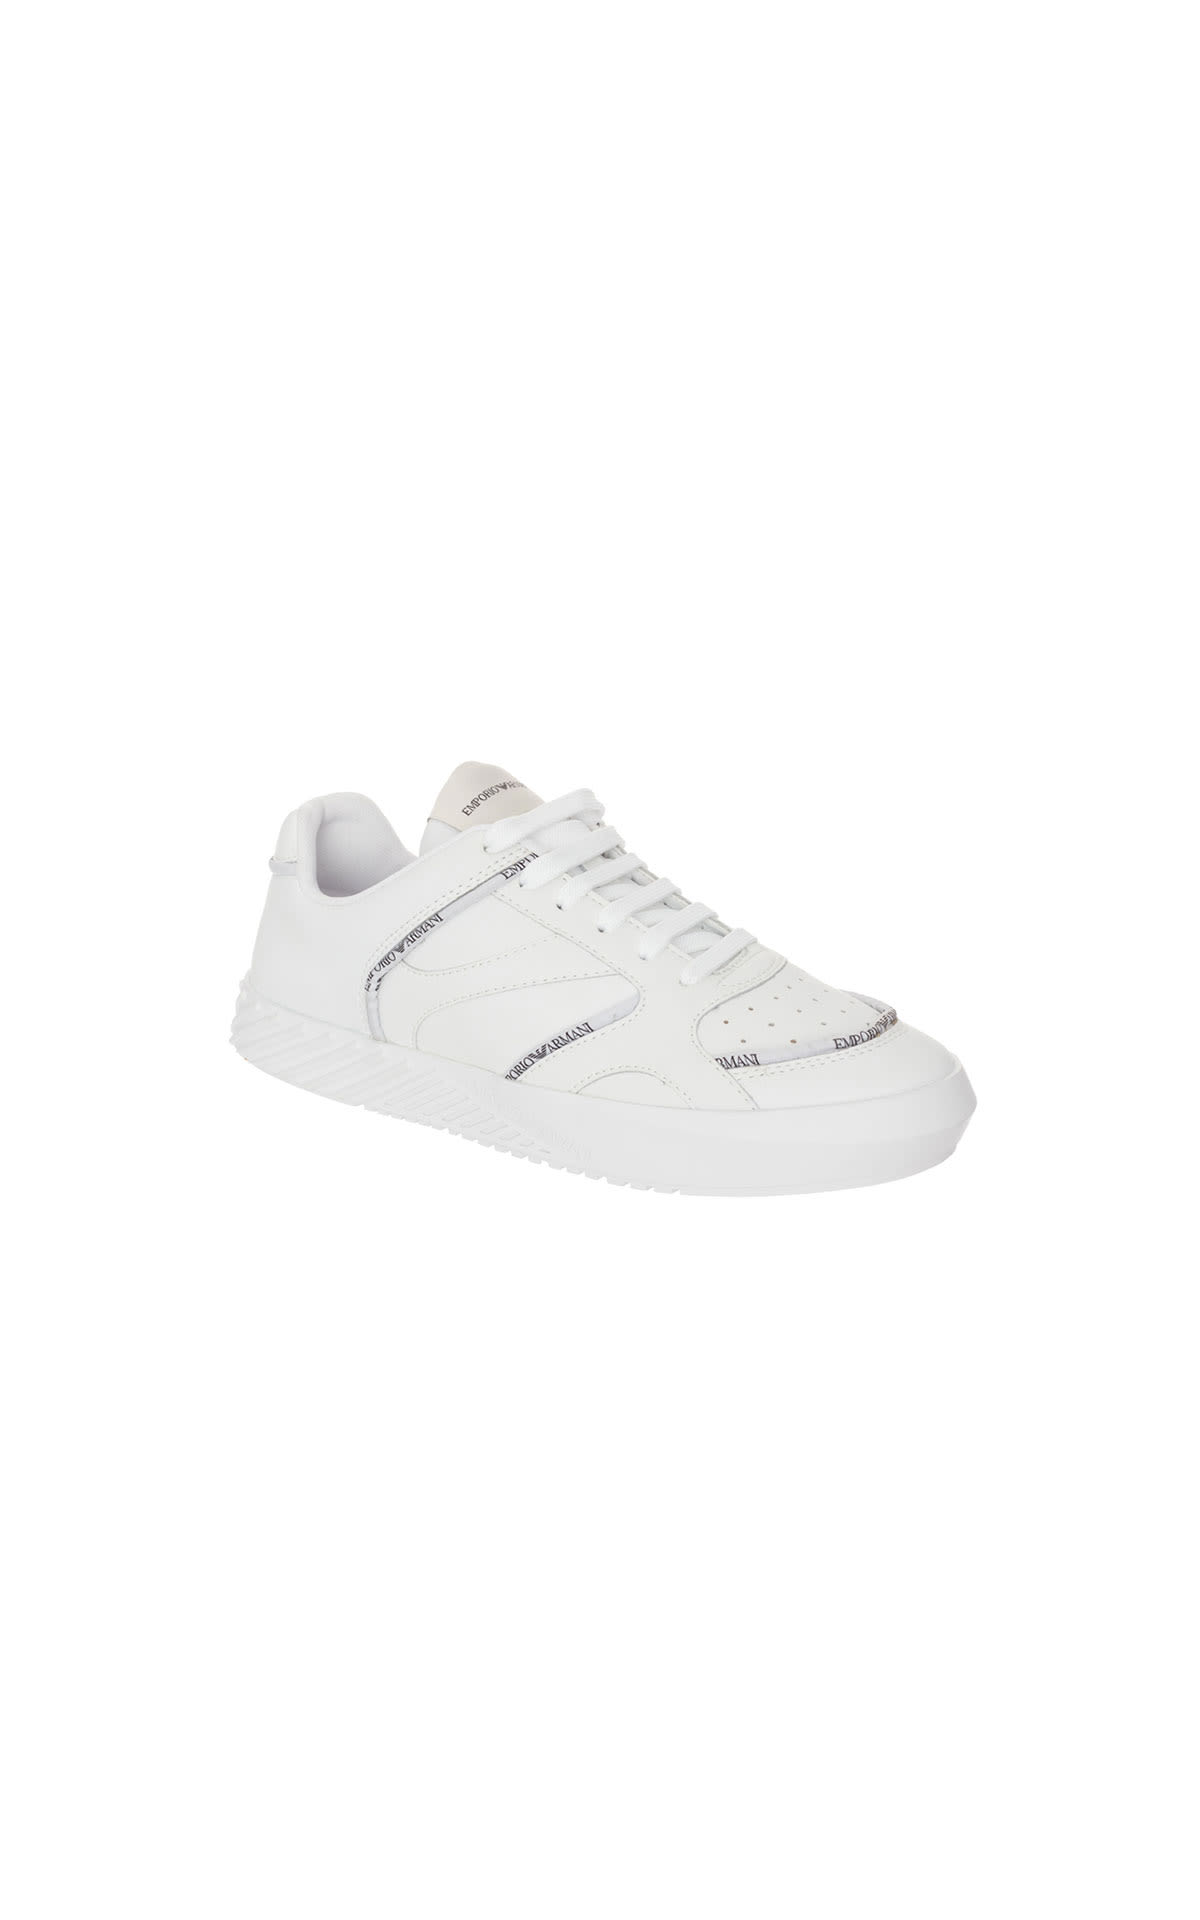 Armani White sneaker from Bicester Village